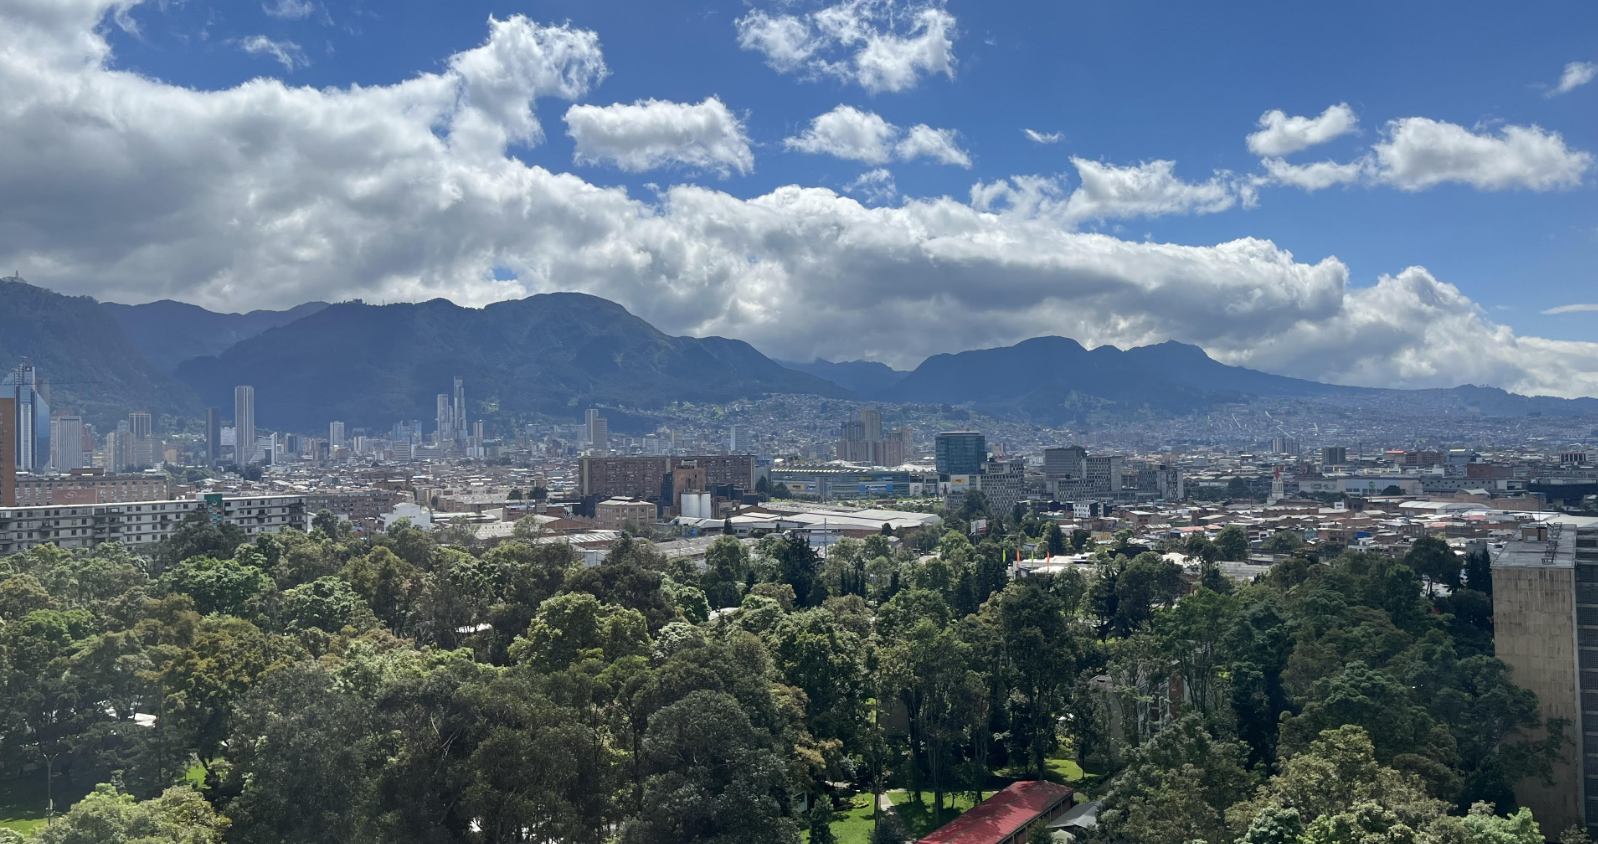 A general view of Bogota in Colombia, where the high altitude has been impacting performances at the IWF World Championships ©ITG